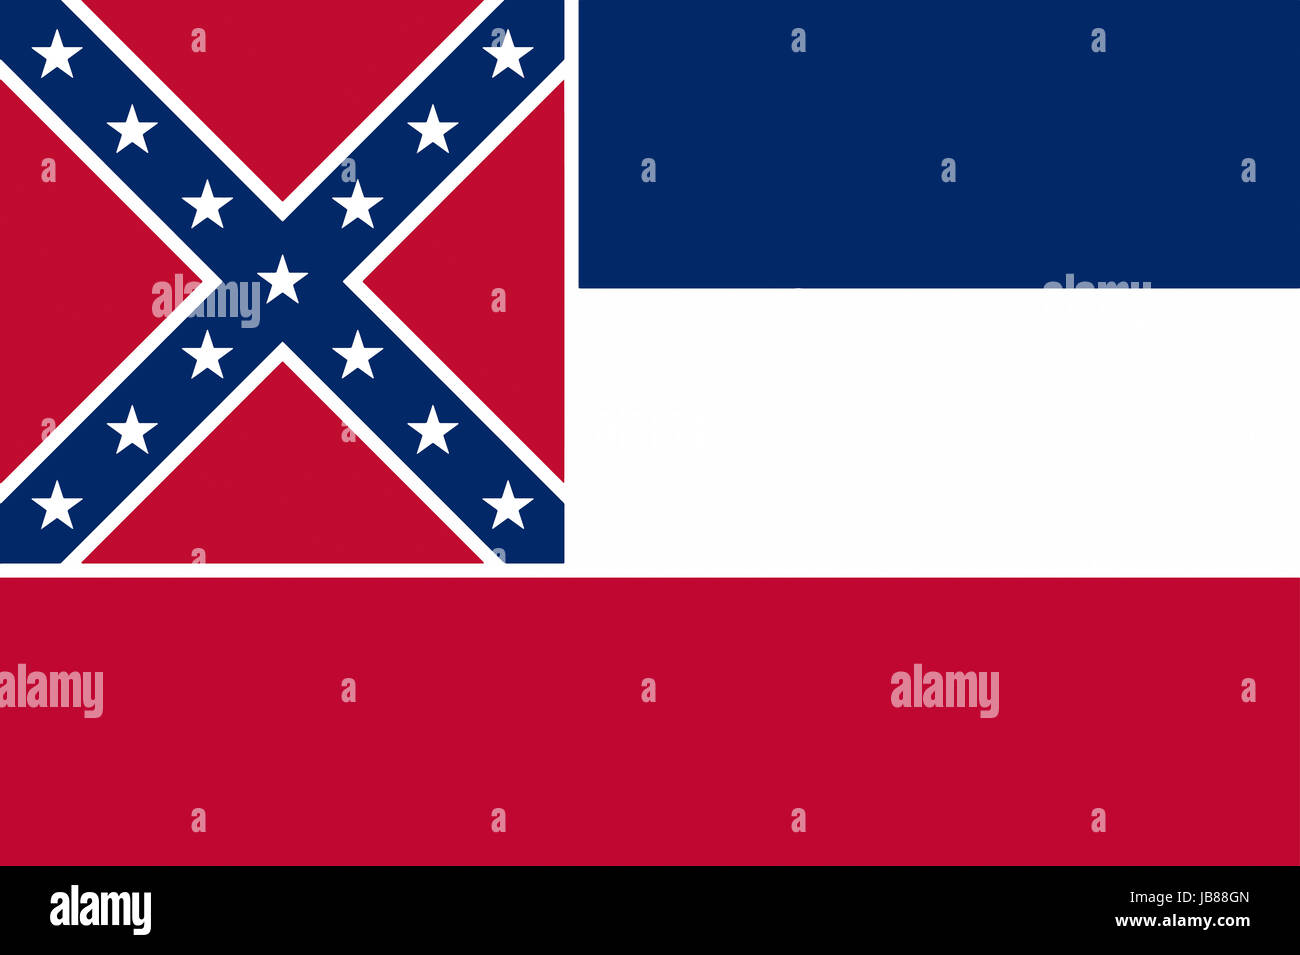 Illustration of the flag of Mississippi state in America Stock Photo